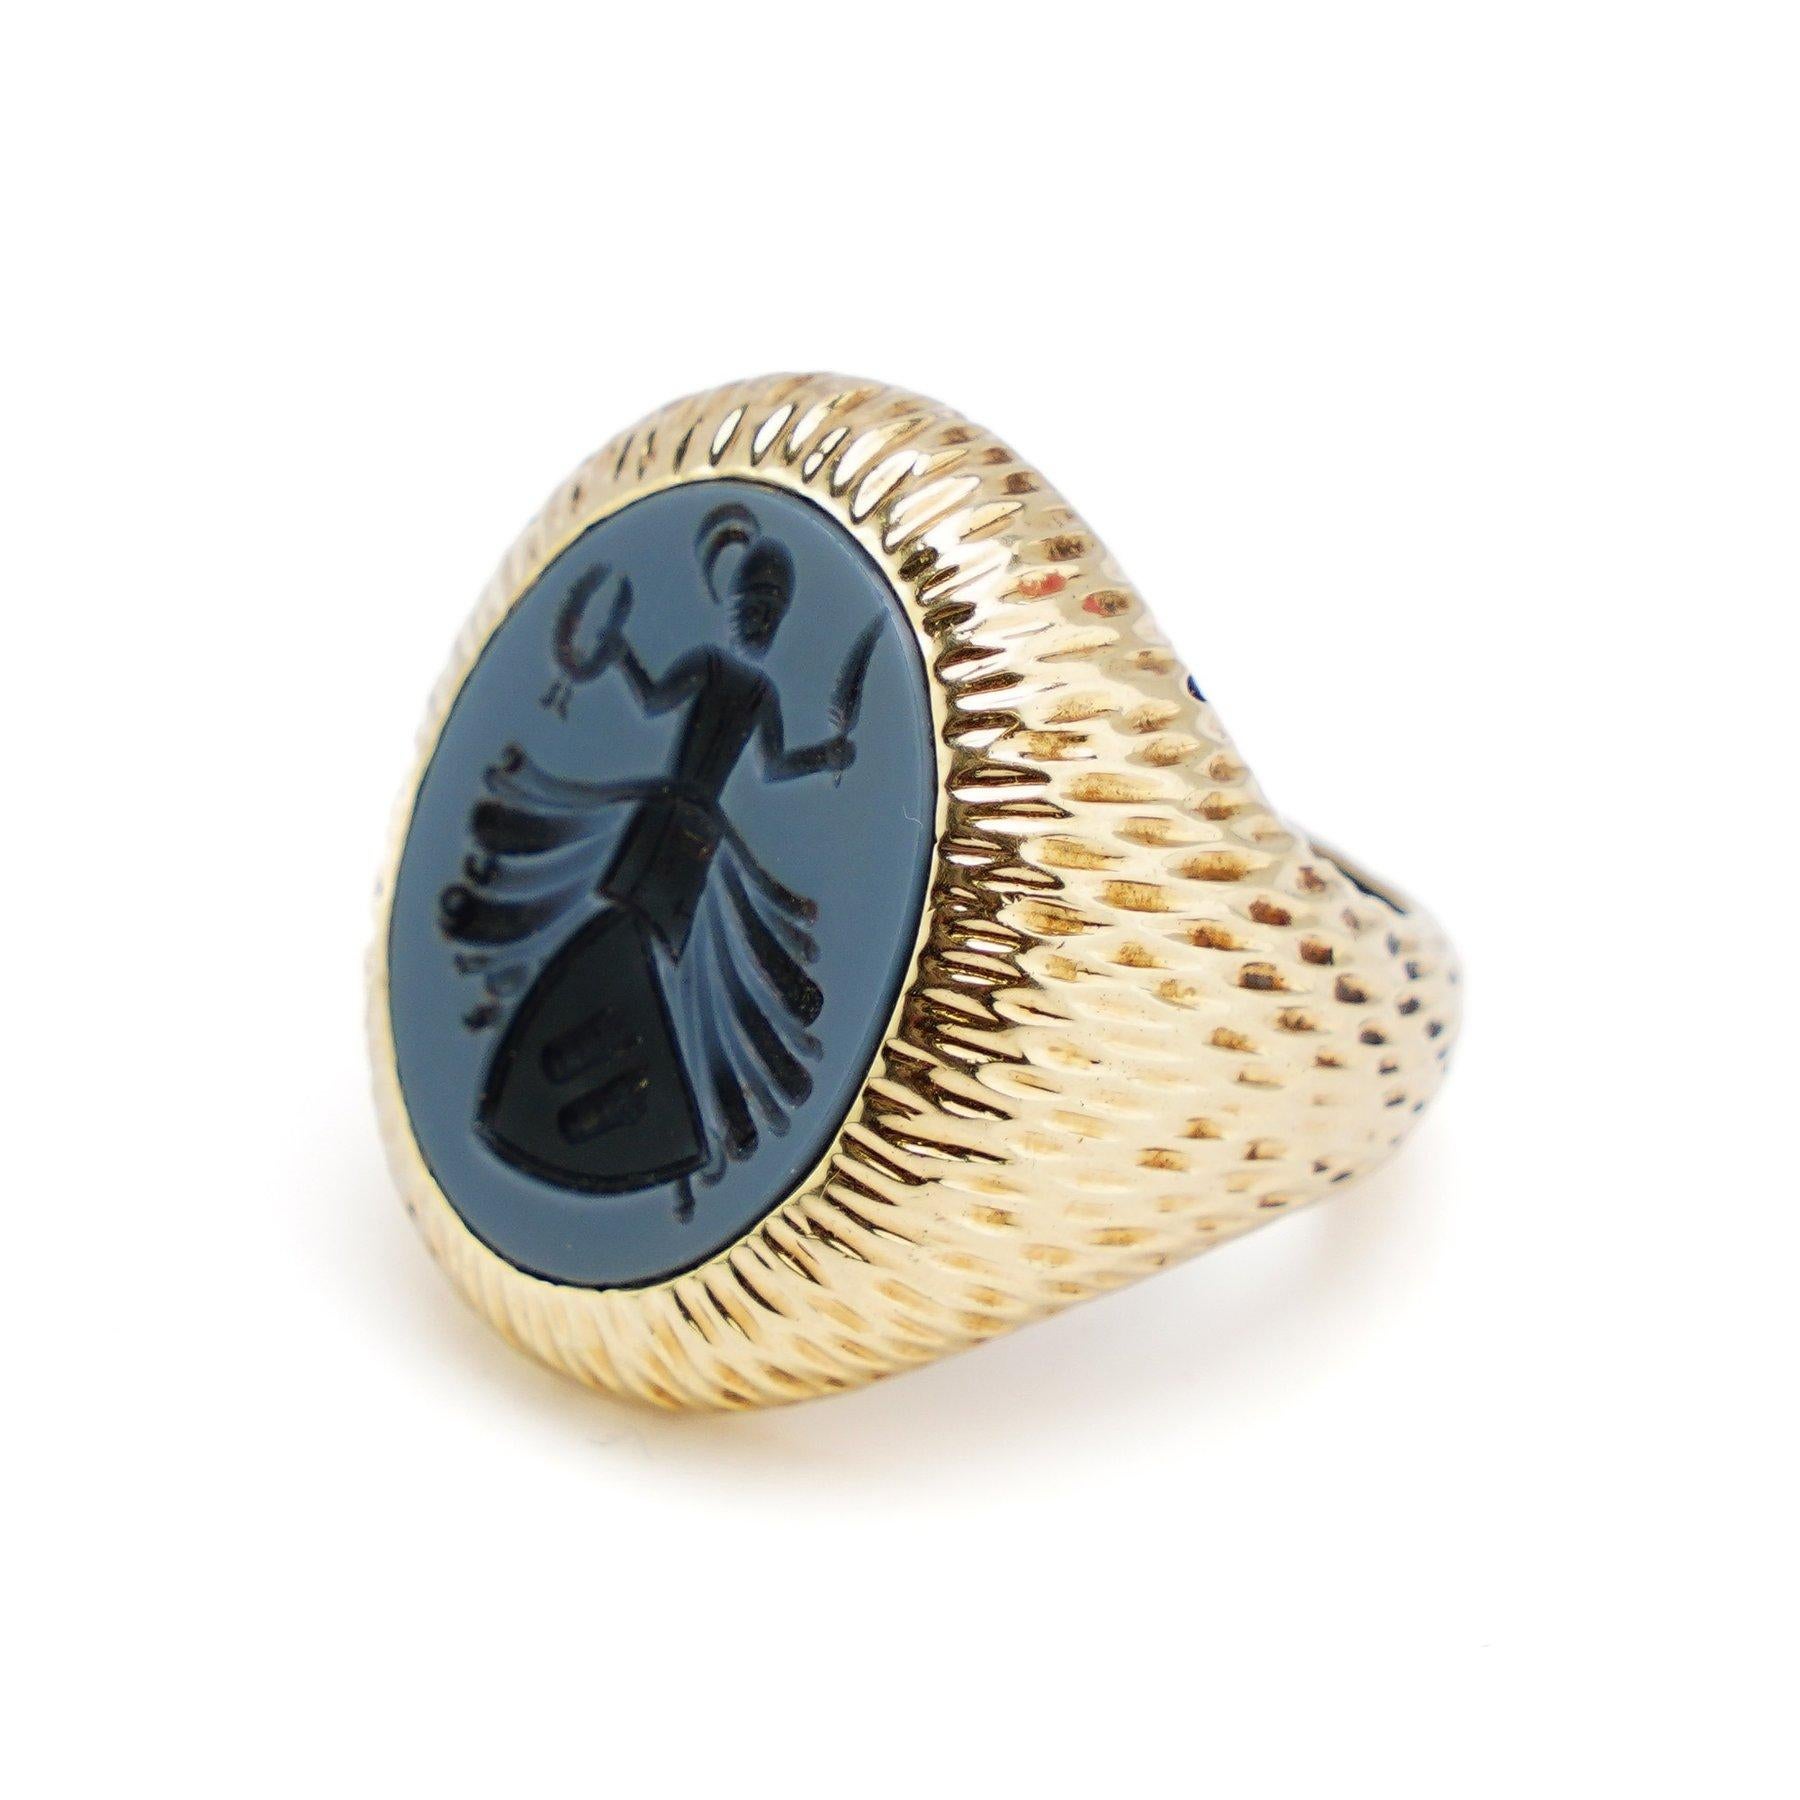 Vintage signet ring crafted from 14kt yellow gold, featuring an oval carved sardonyx intaglio.
The intaglio depicts a Sufi male engaged in the traditional whirling dance, holding a wreath and feather.
This exquisite piece, dating back to the 1970s,